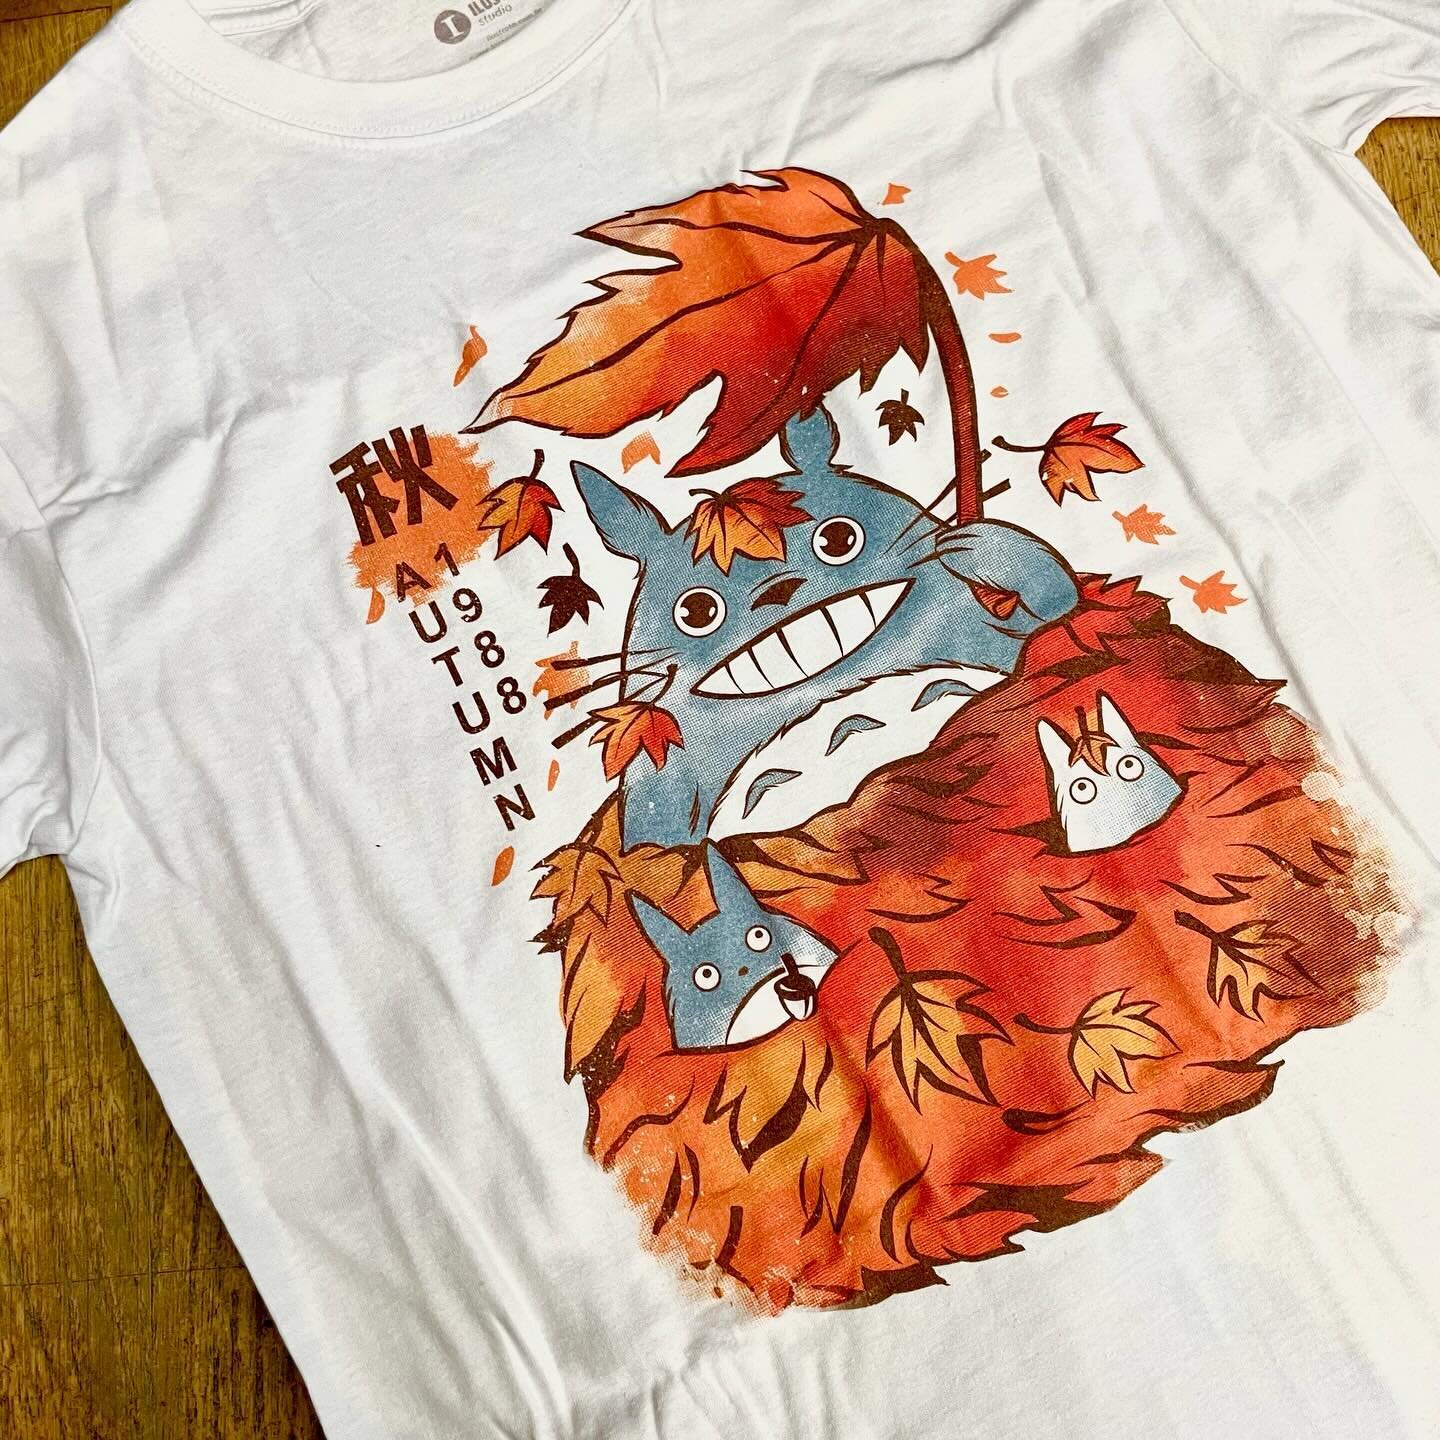 New t-shirts in-store and online now. All are available as part of our &lsquo;2 for &pound;27.50&rsquo; deal.

#thetvandmoviestore #tvandmoviestore #tvm #tvmnorwich #tvandmoviestorenorwich #norwich #studioghibli #ghibli #avatar #thelastairbender #ava